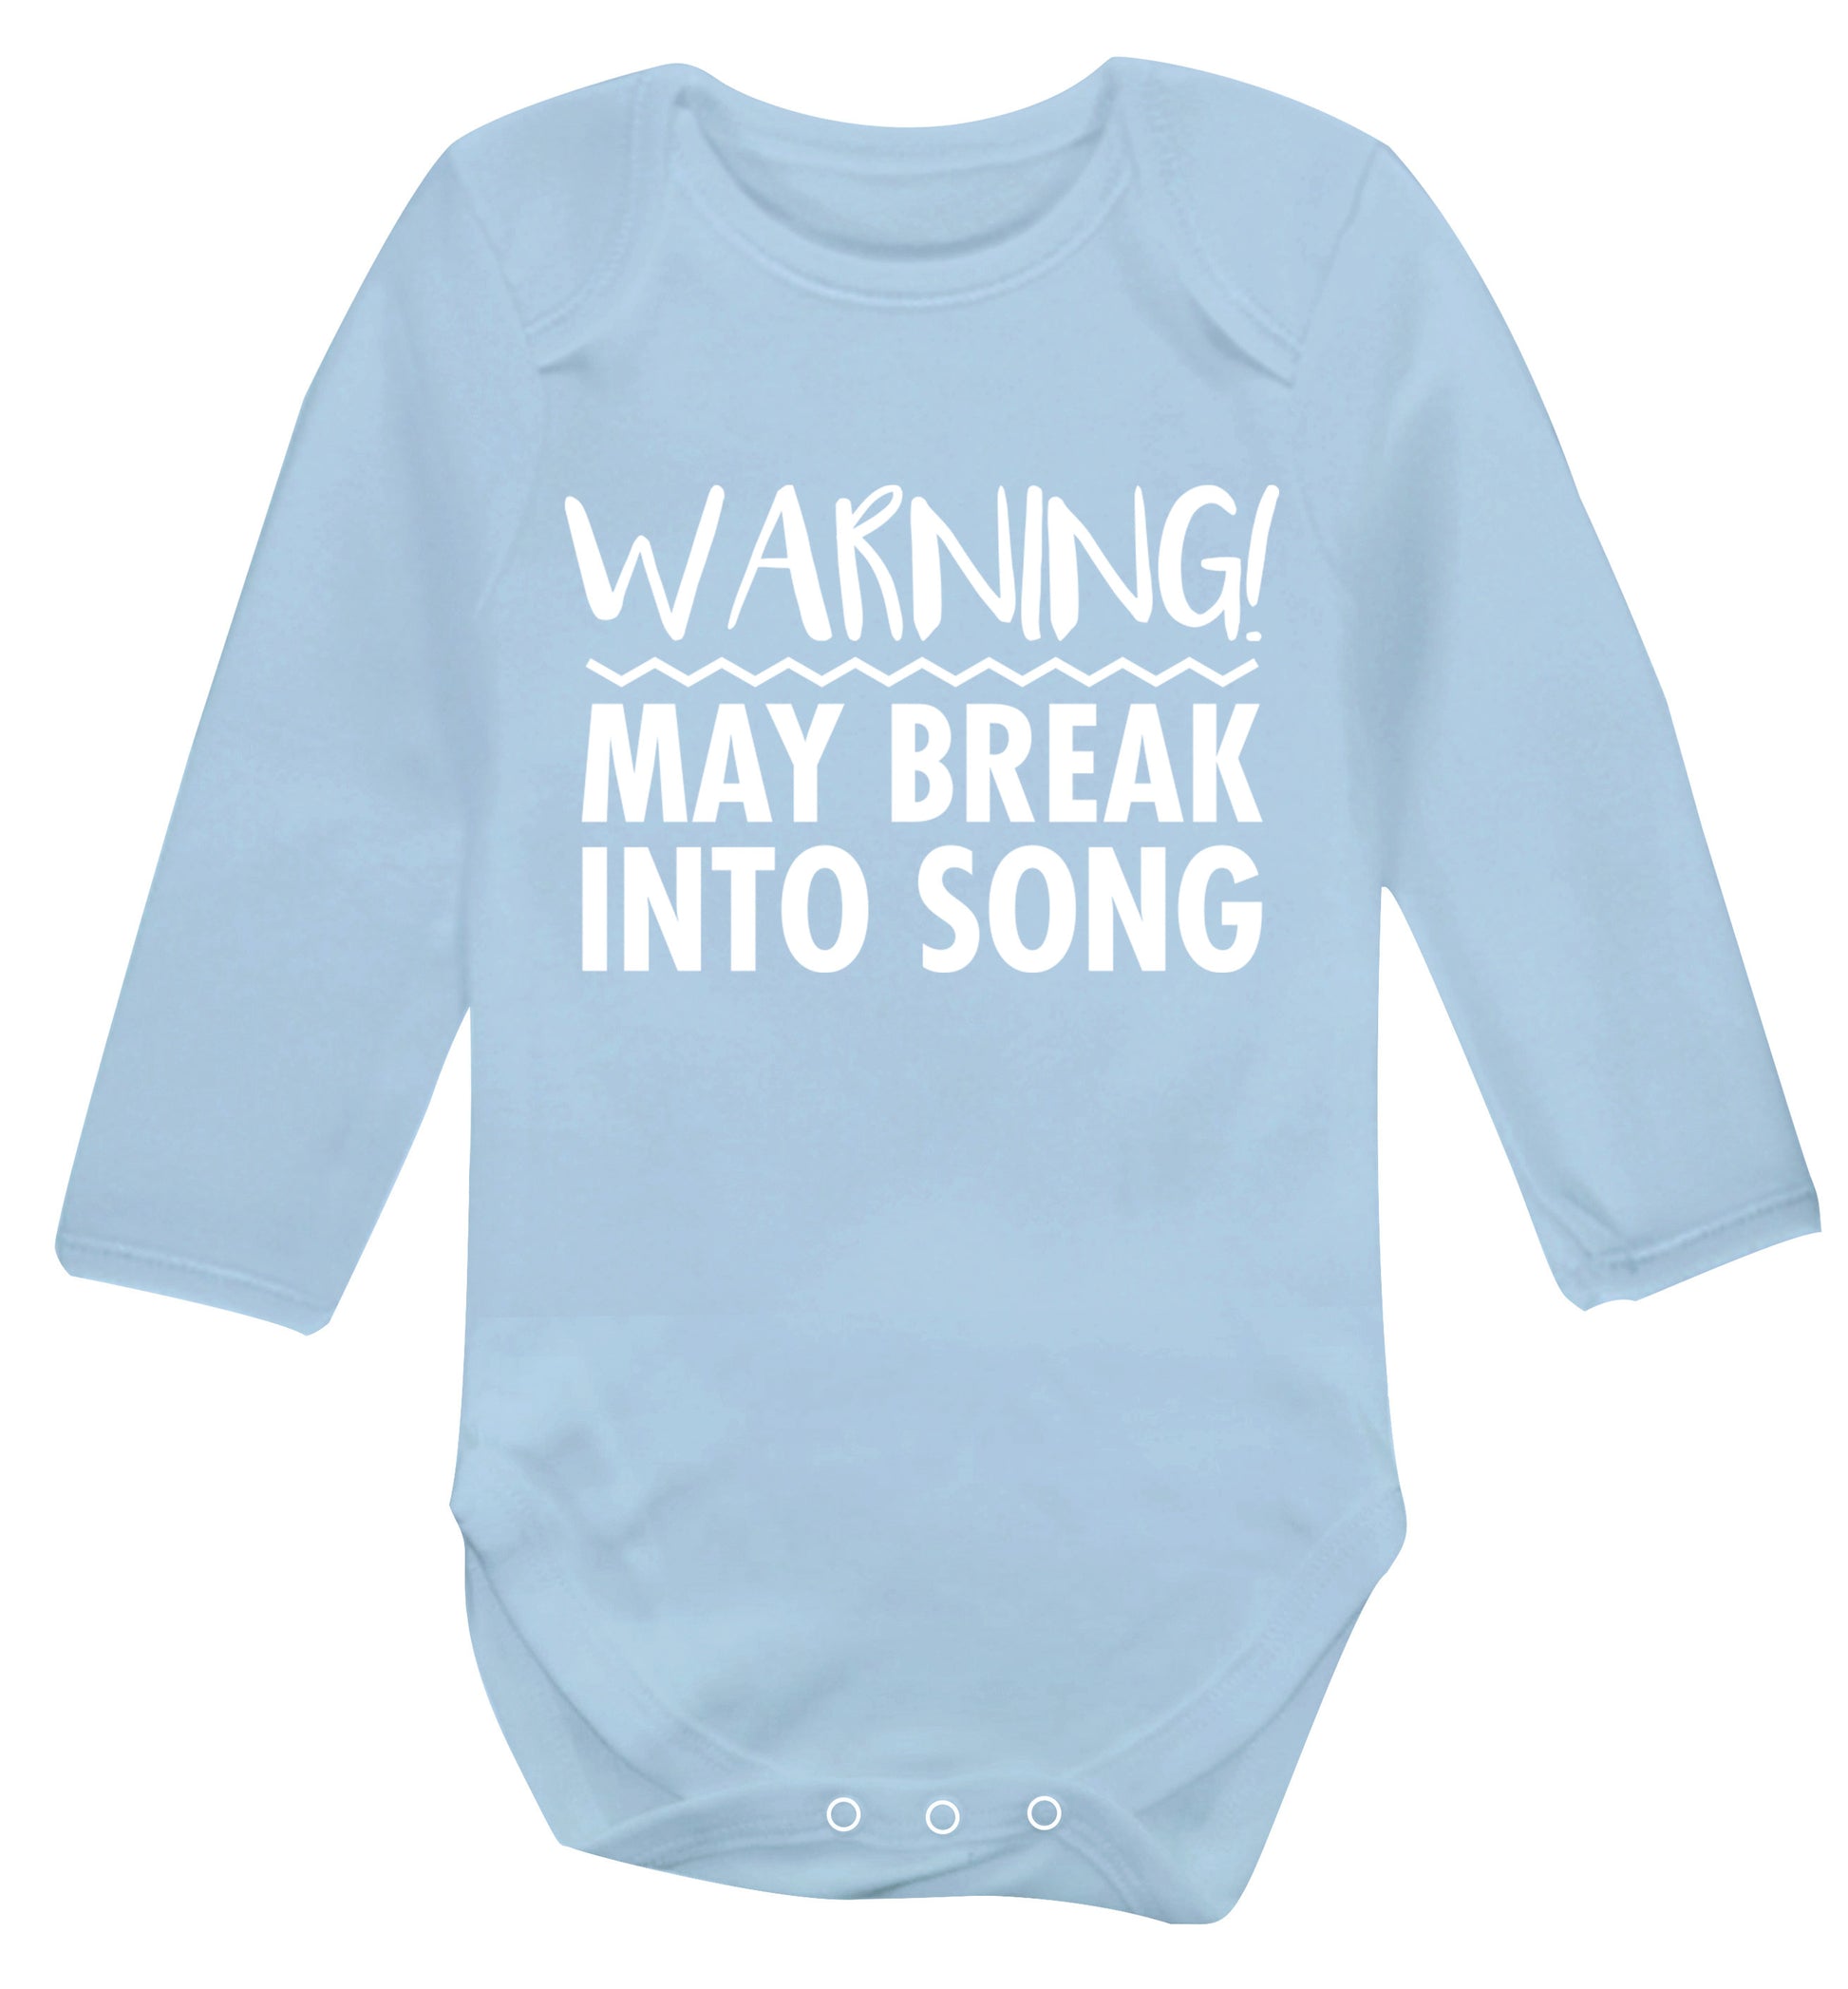 Warning may break into song Baby Vest long sleeved pale blue 6-12 months